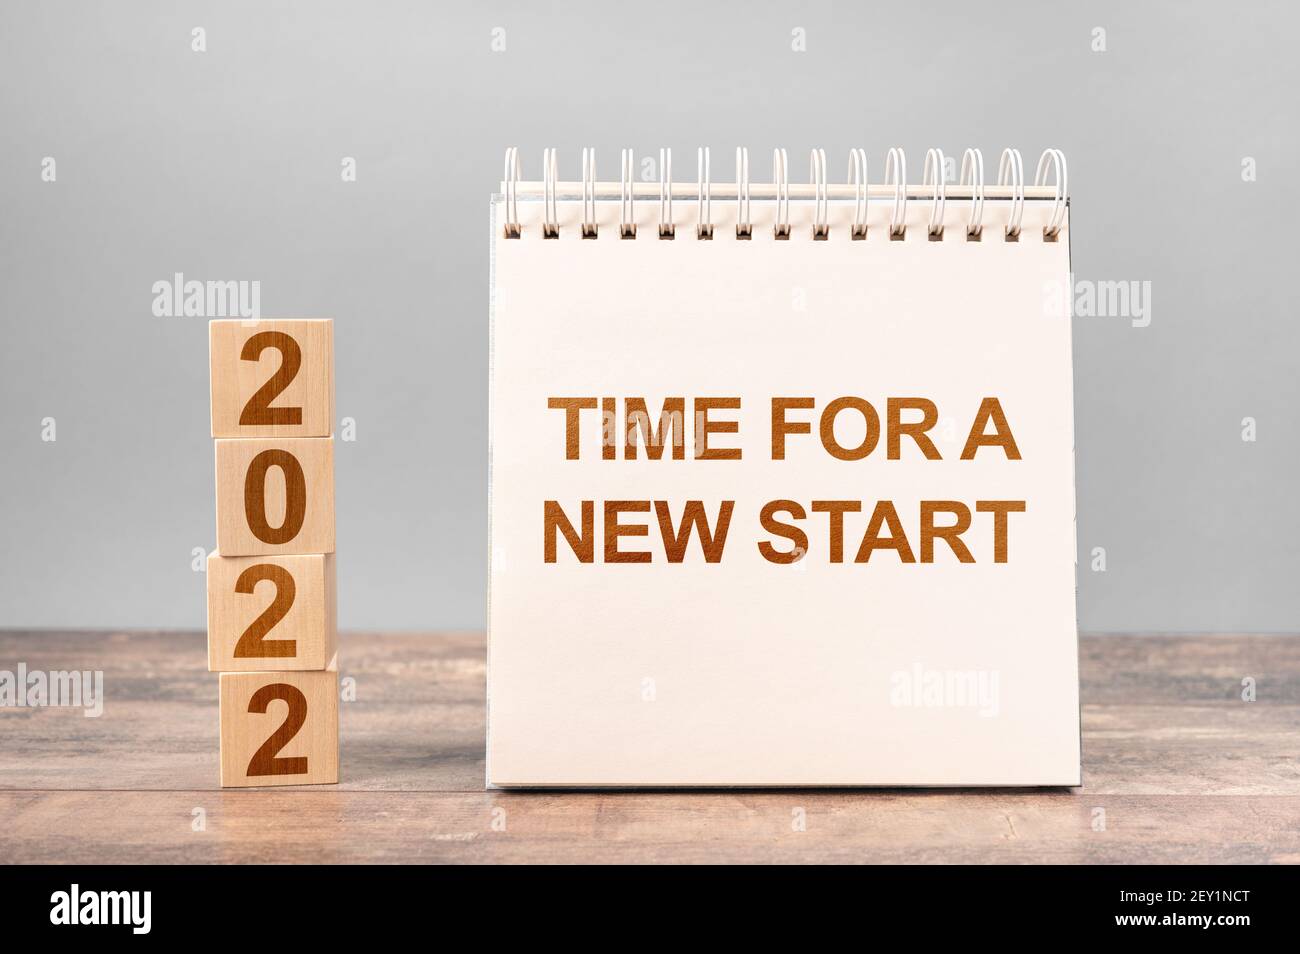 2022 time for a new start. Time for A New Start words and 2022 cubes wooden table background. New Year. startup concept Stock Photo